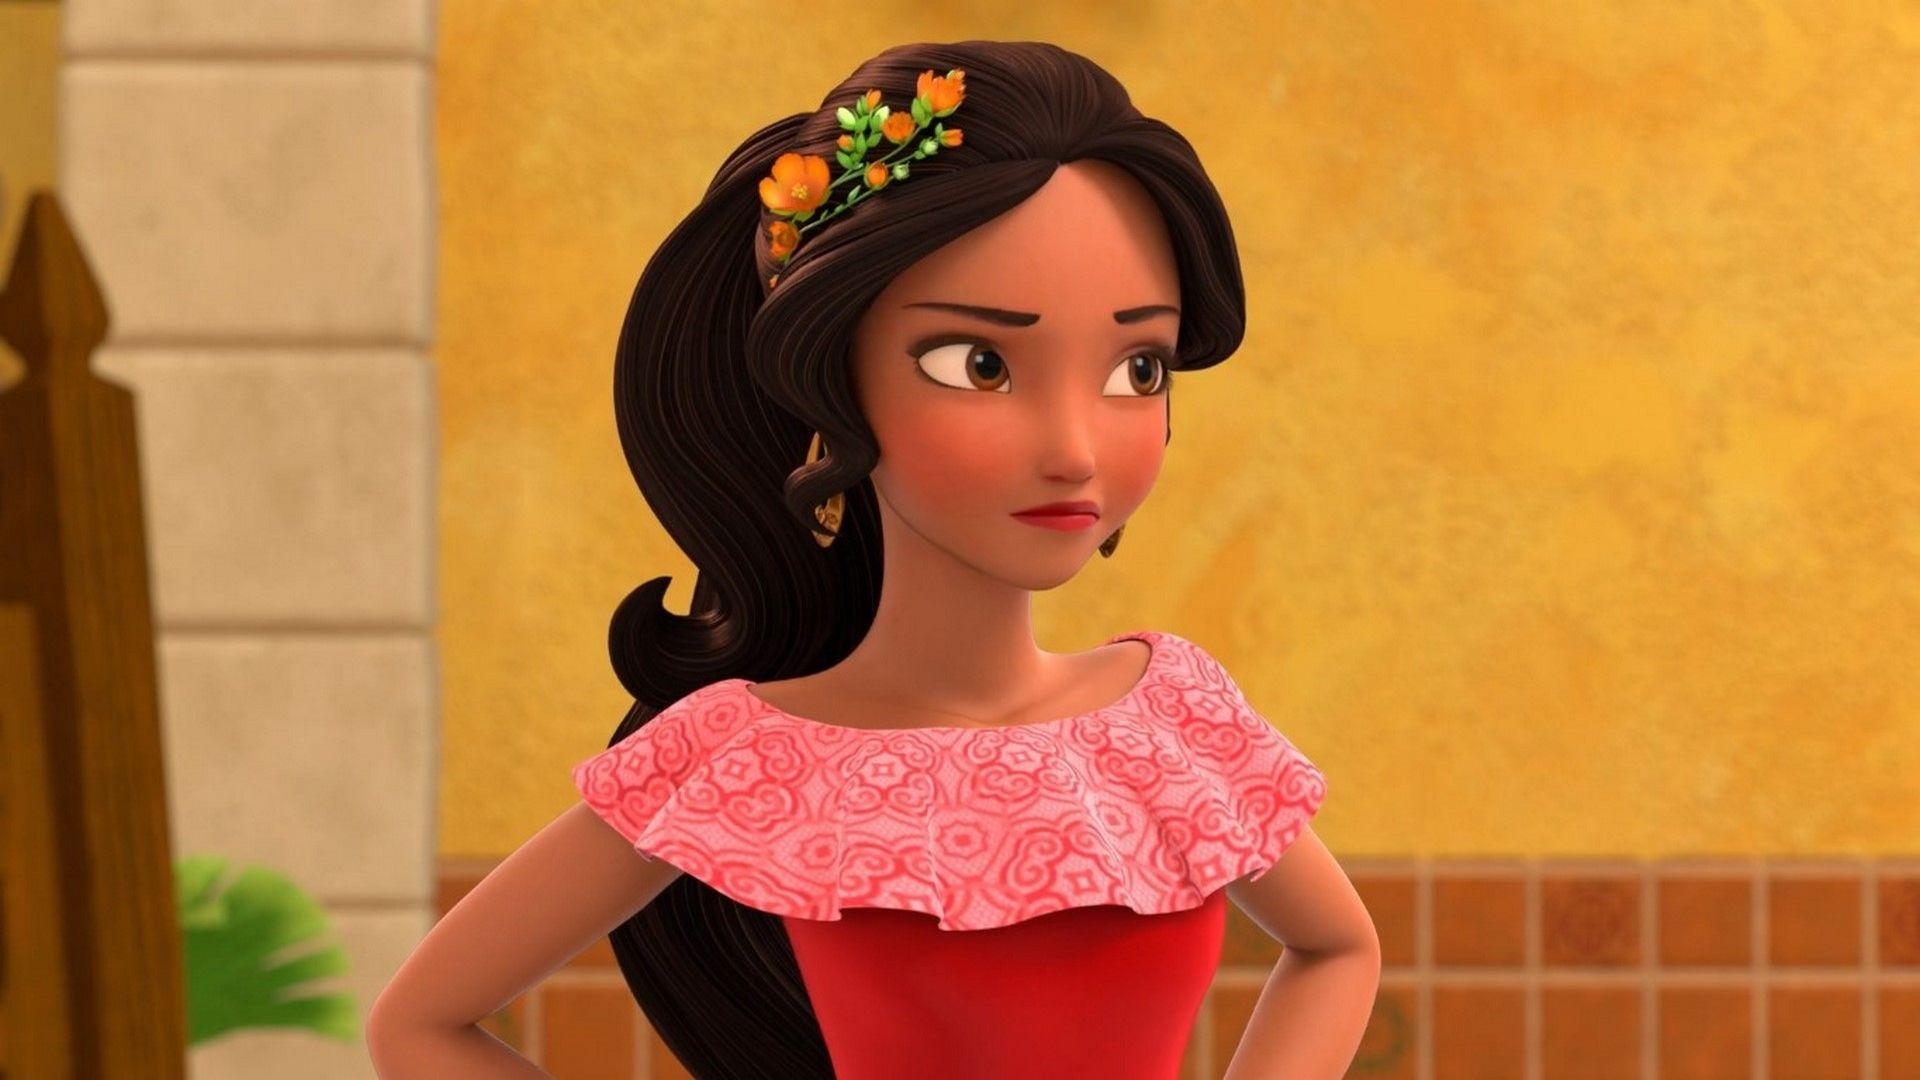 Elena of Avalor': Disney's Latest Misguided Attempt to Diversify.